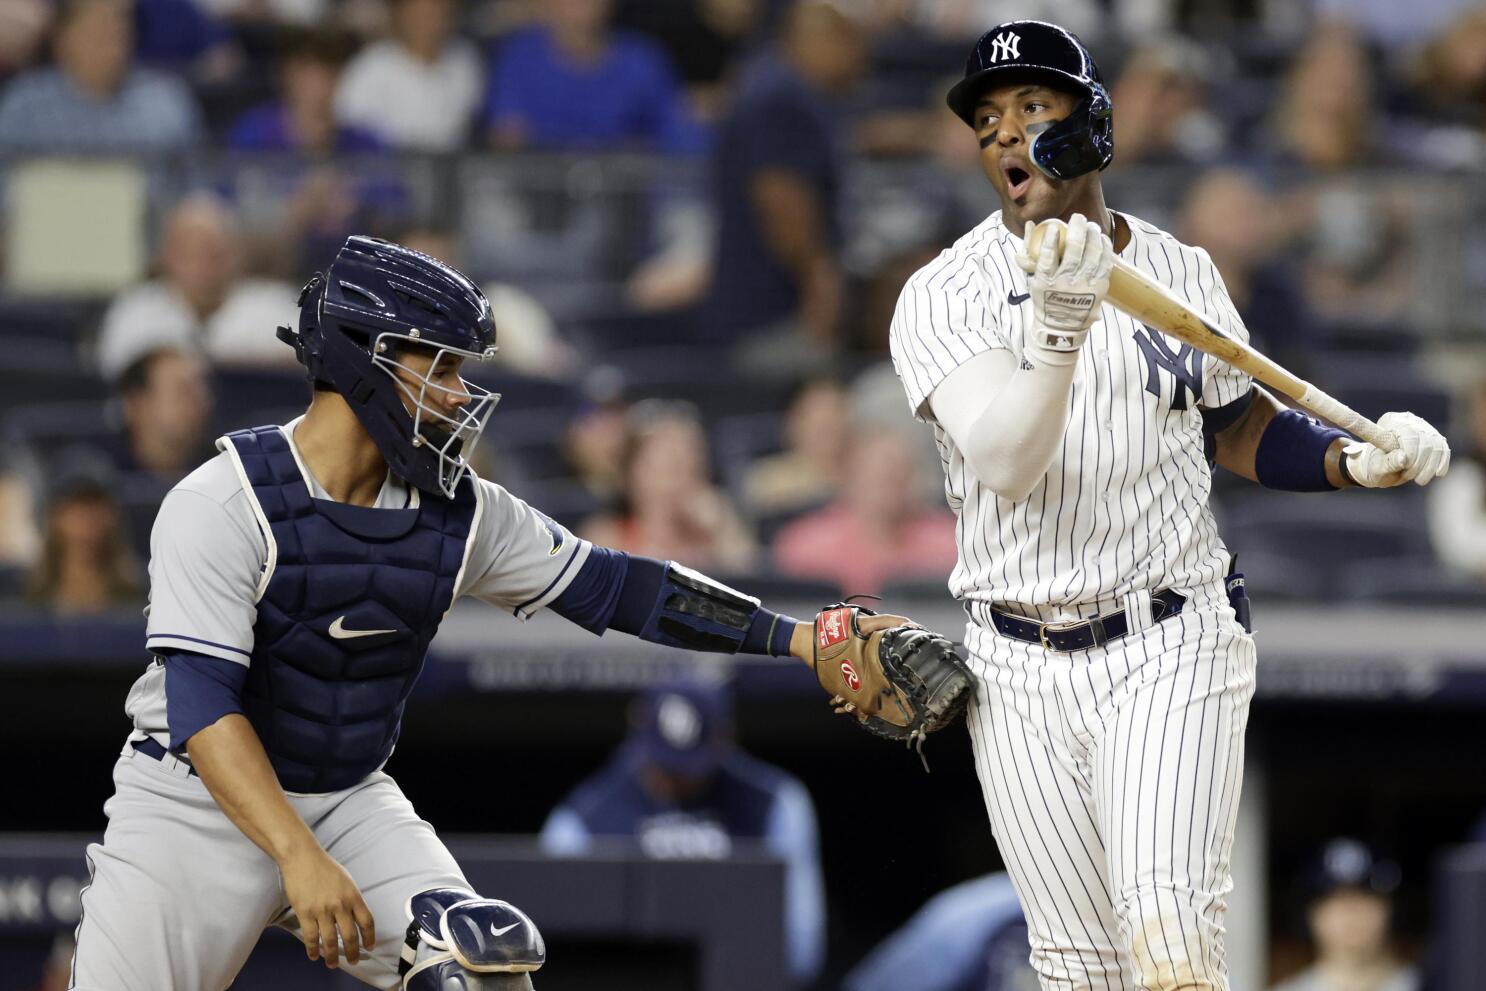 Miguel Andujar's Recovery: Rehab, Then Learn 2 New Positions - The